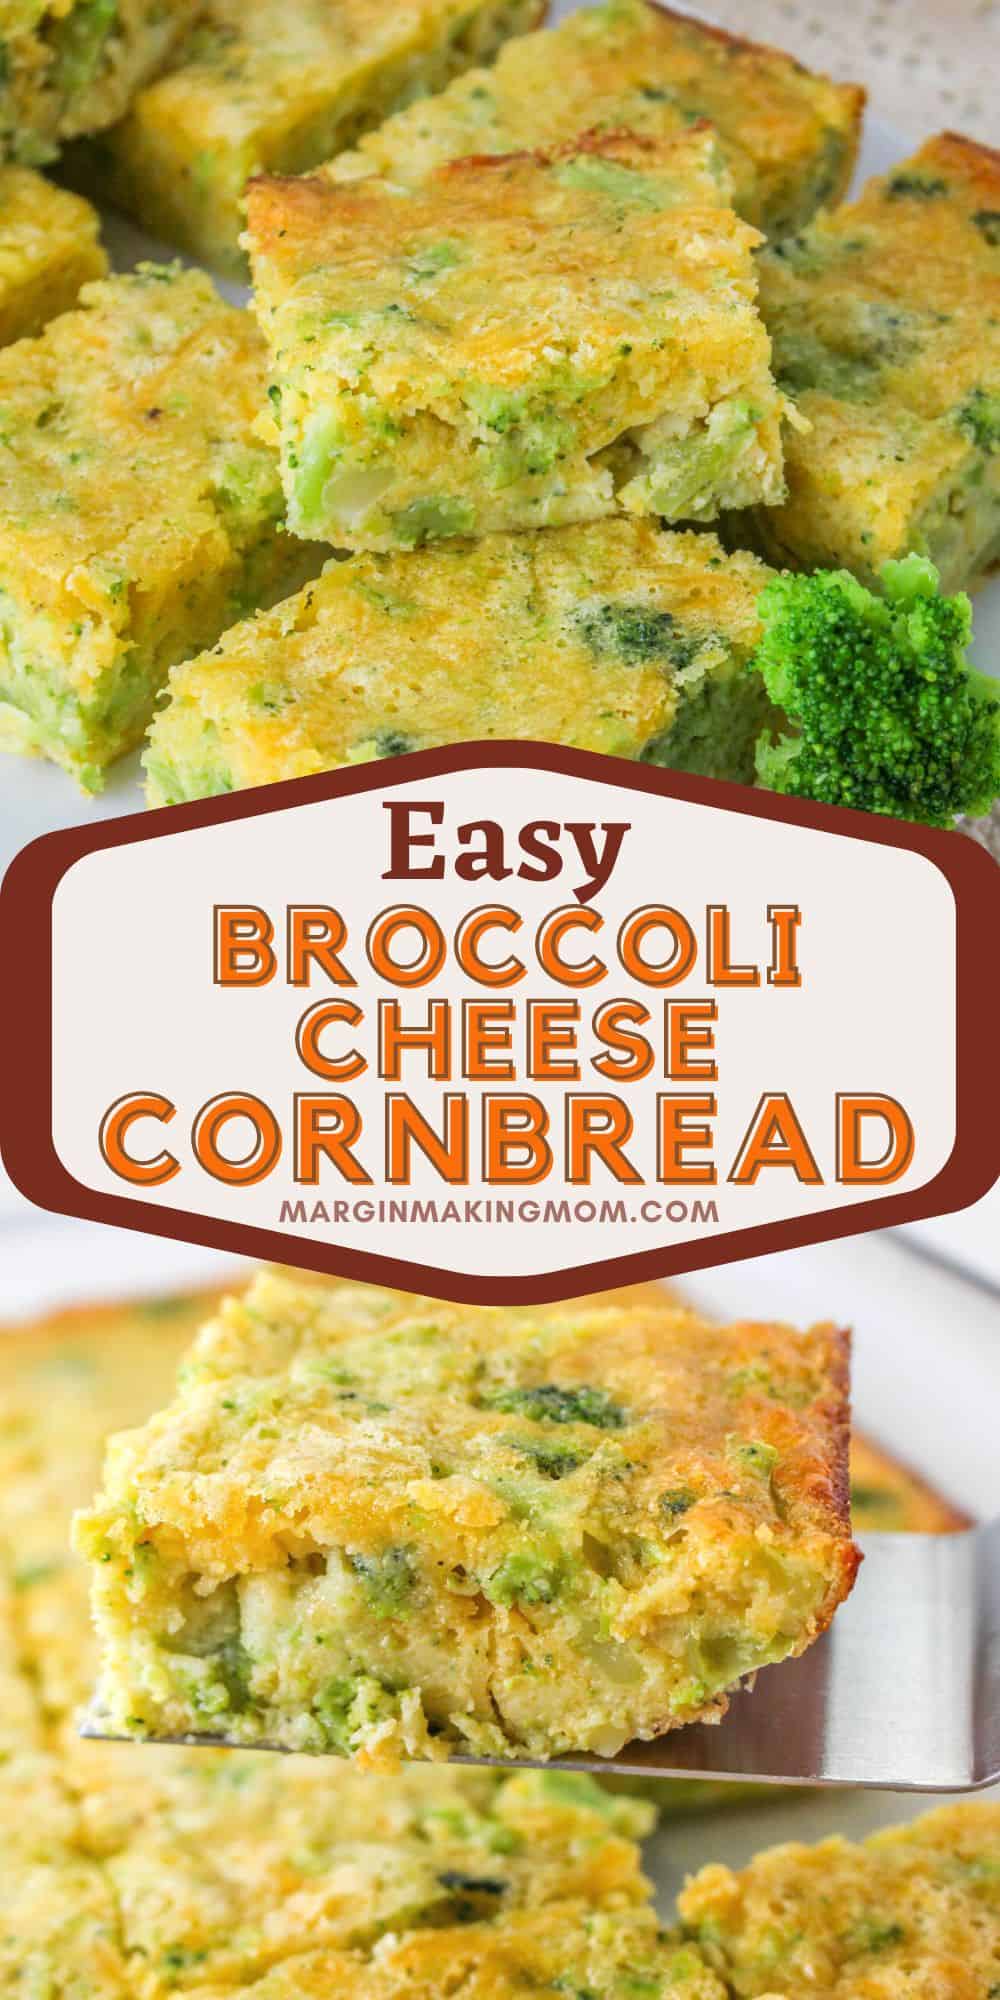 two photos; one shows squares of cheesy broccoli cornbread on a plate, the other shows a spatula lifting out a slice of broccoli cornbread from the pan.